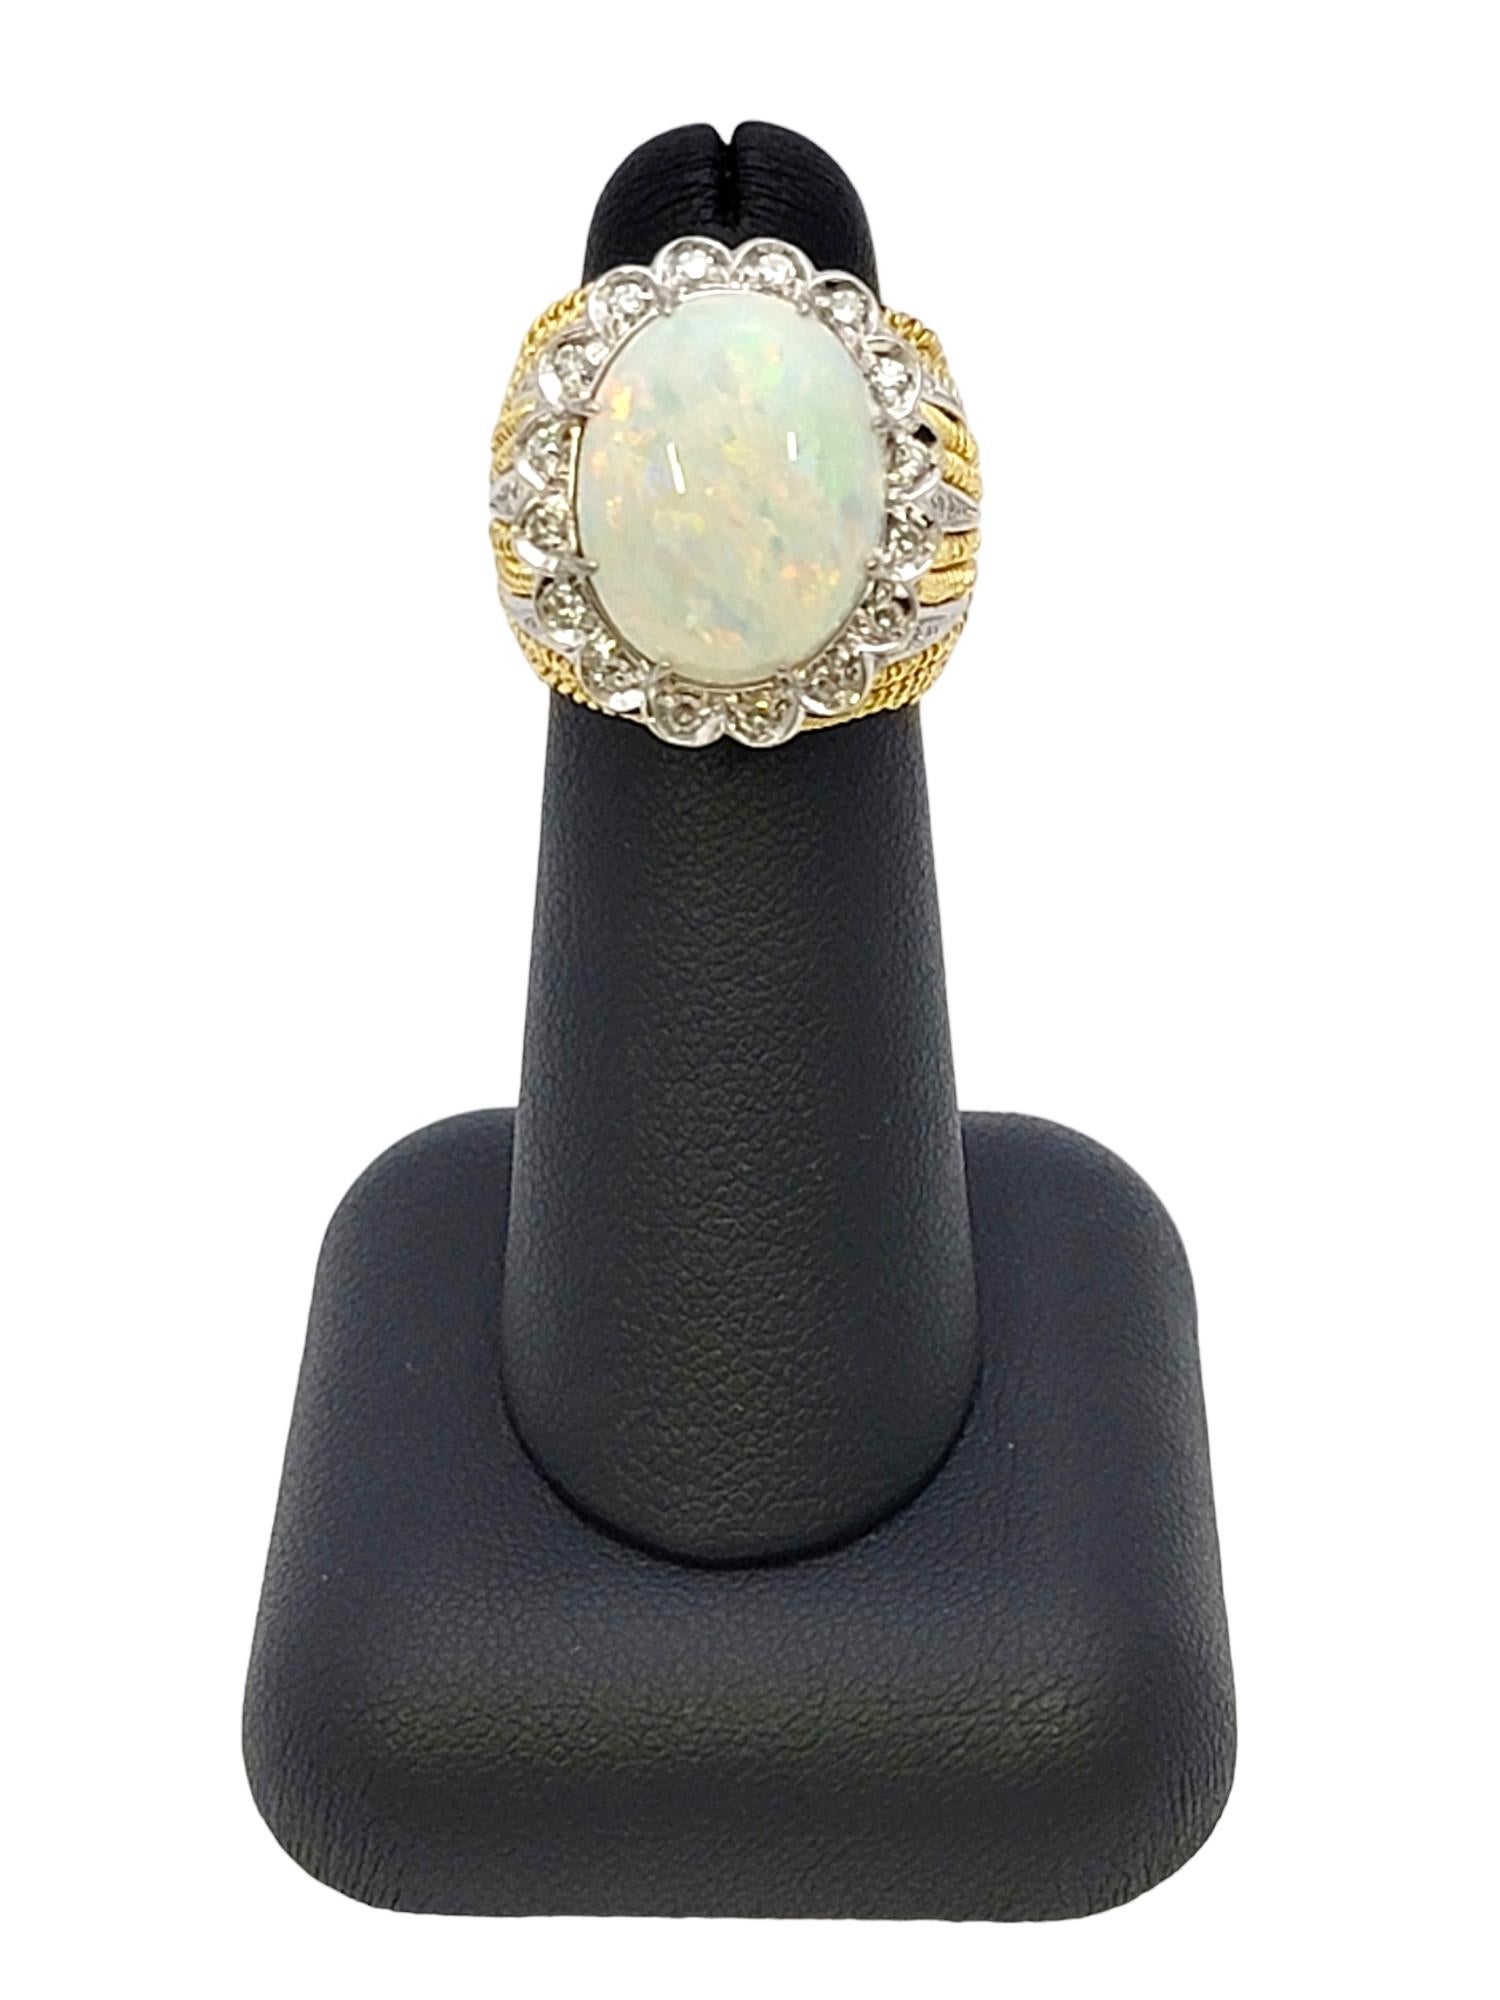 Huge Cabochon Opal Cocktail Ring with Diamond Halo in 18 Karat Yellow Gold For Sale 9